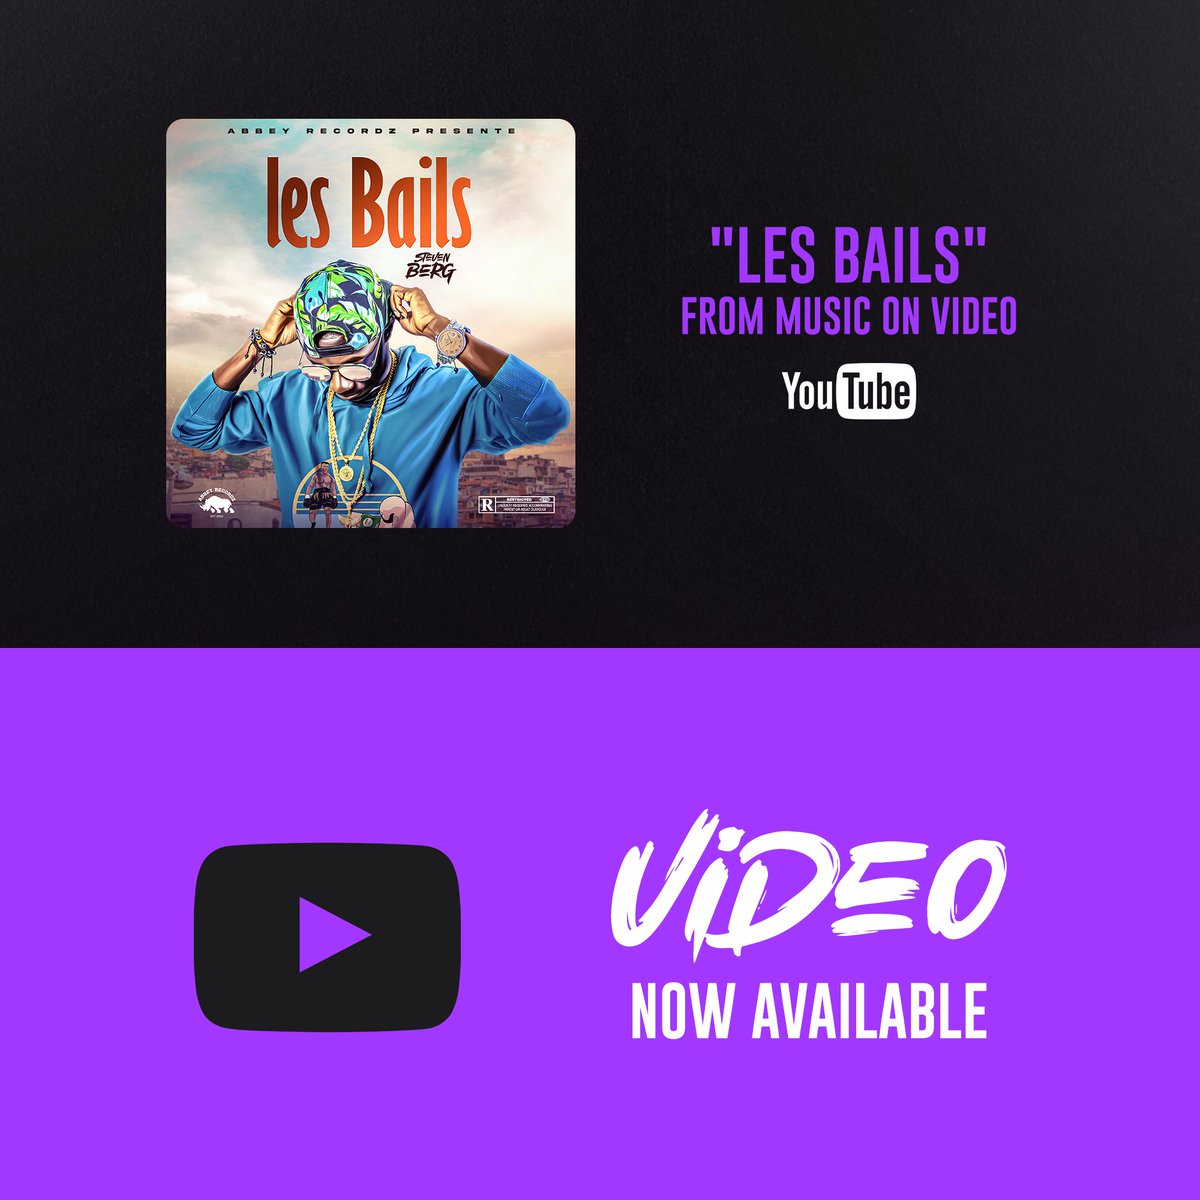 🚨🚨 Music video 📢📢 « Les Bails » out now 📺 👉🏽 youtu.be/tZBxvwHiZpE?fe… #music #performance #artist #distrokid #rapmusic #afro #communitymanager #newsong #rapper #rap #hiphop #afrobeats #spotify #youtube #livemusic #talent #songwriter #LesBails #musicvideo #nevergiveup